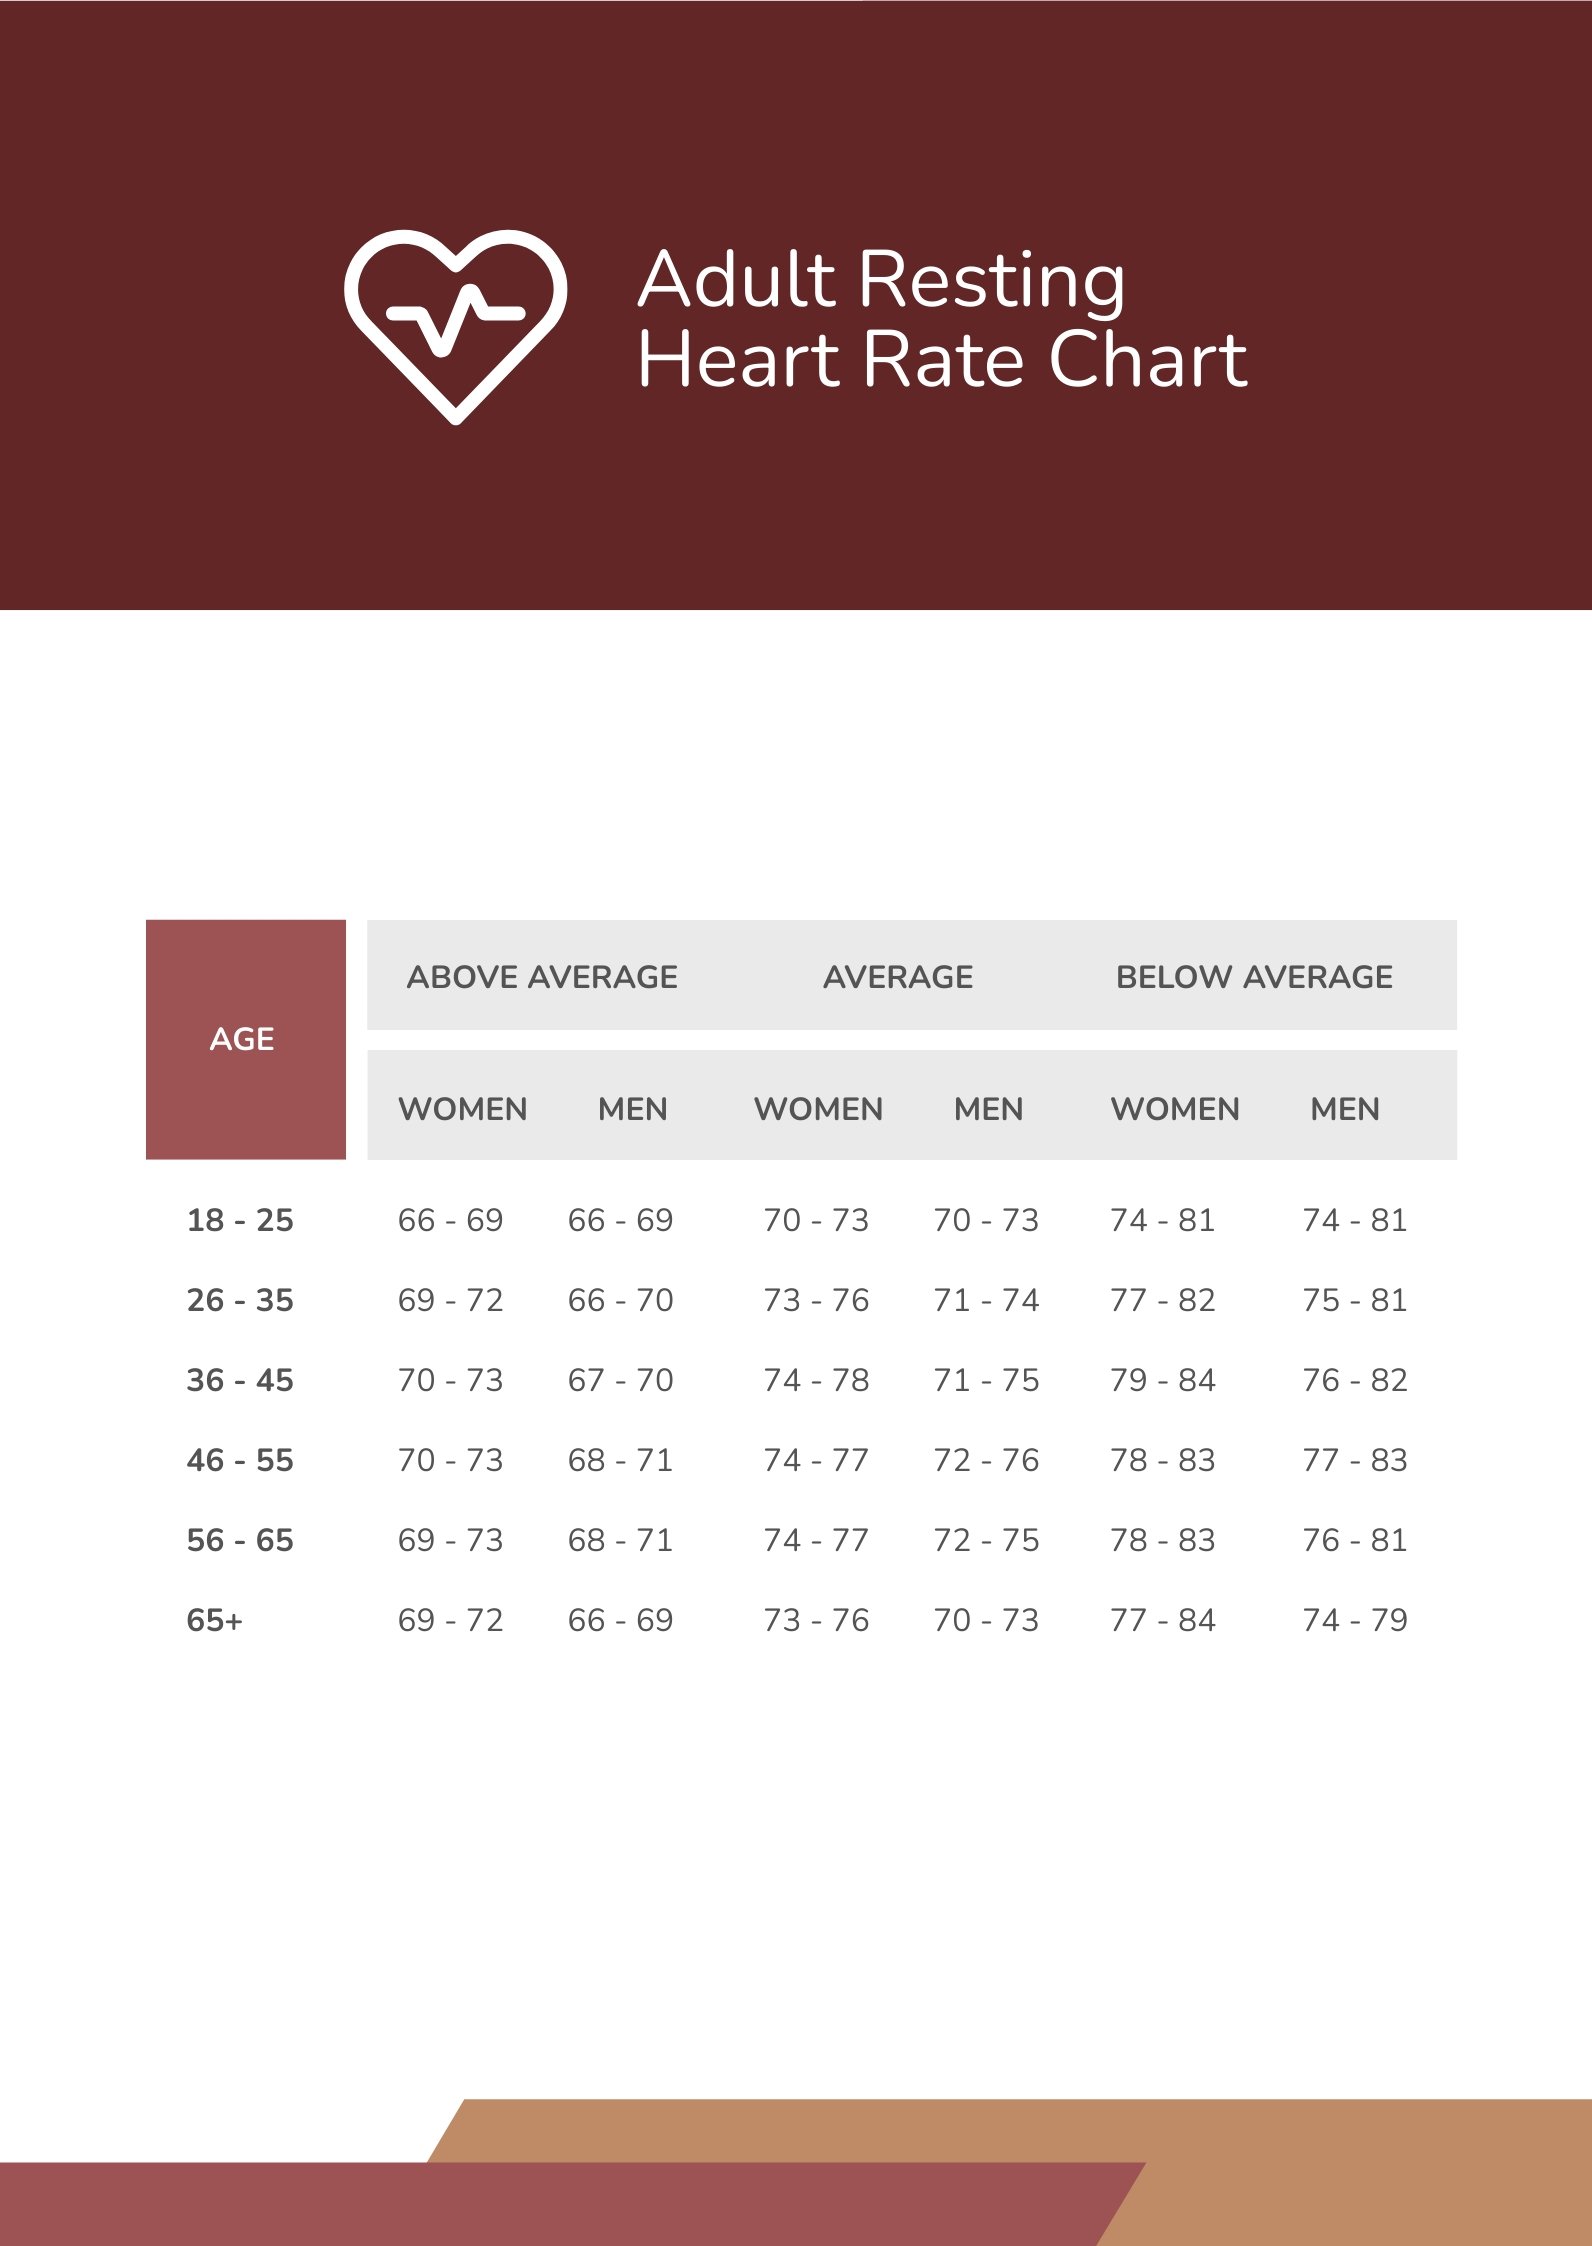 Free Adult Resting Heart Rate Chart in PDF